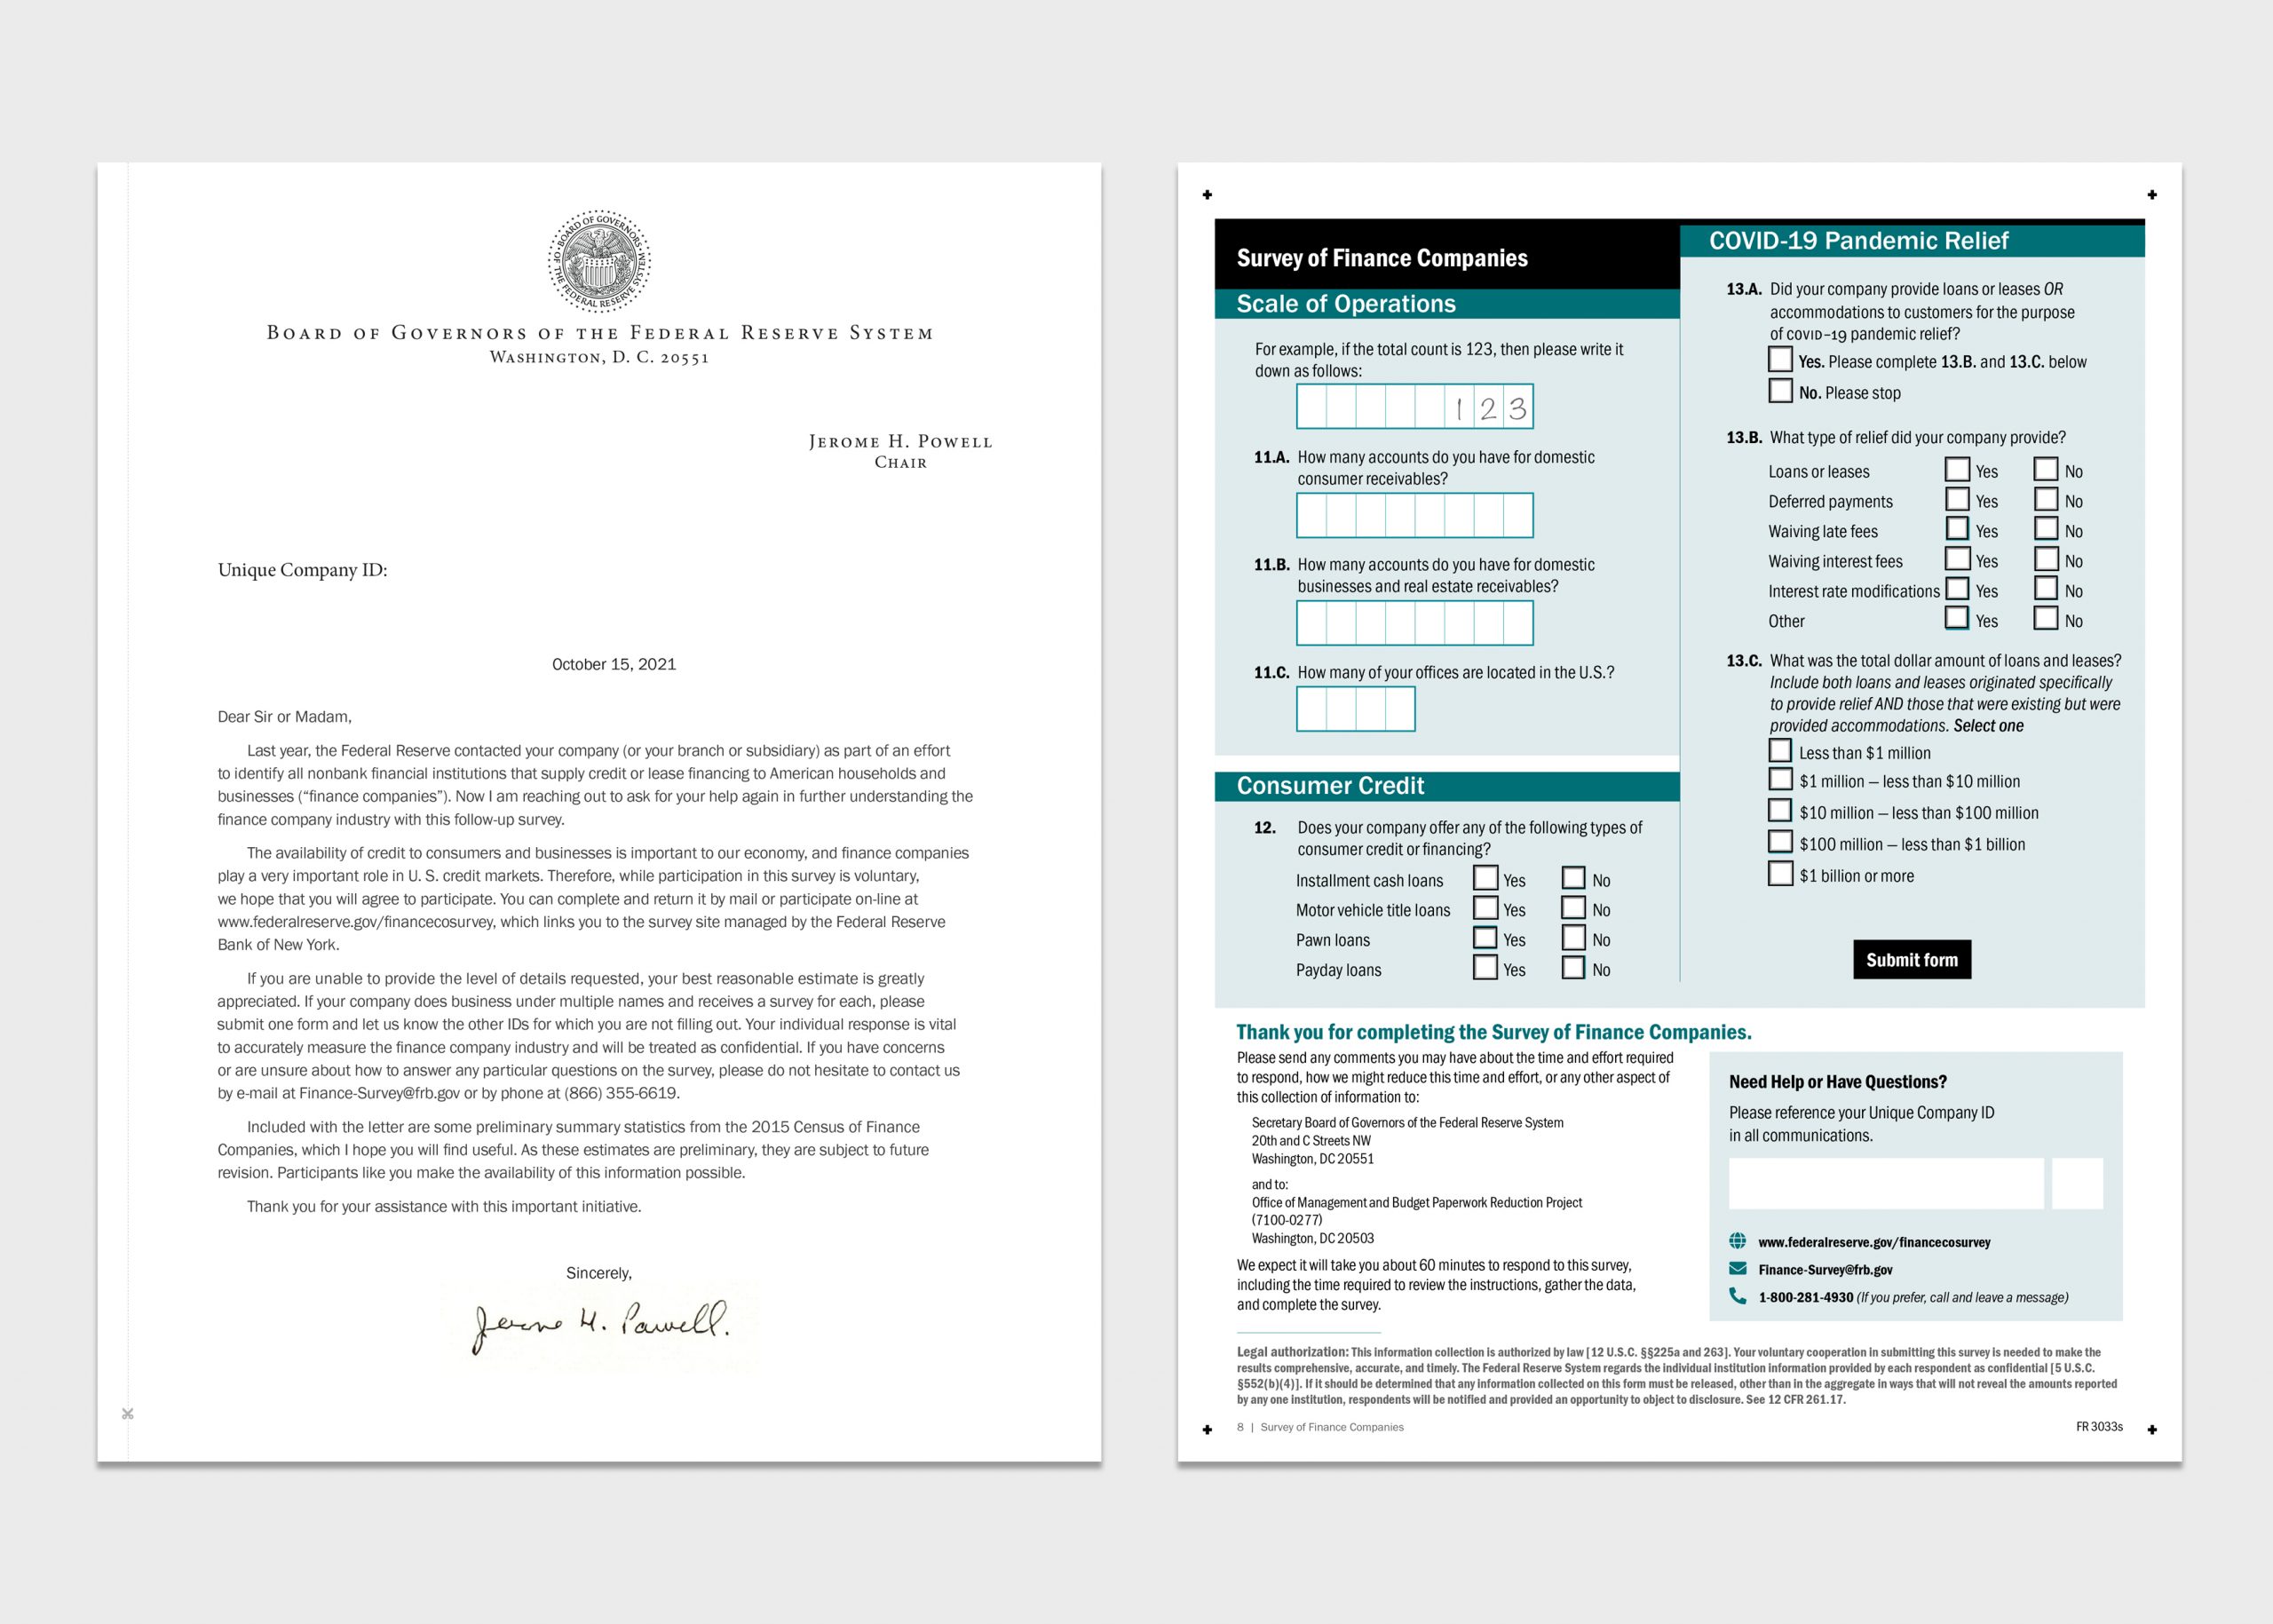 The front and back cover of the print version of the Survey of Financial Companies